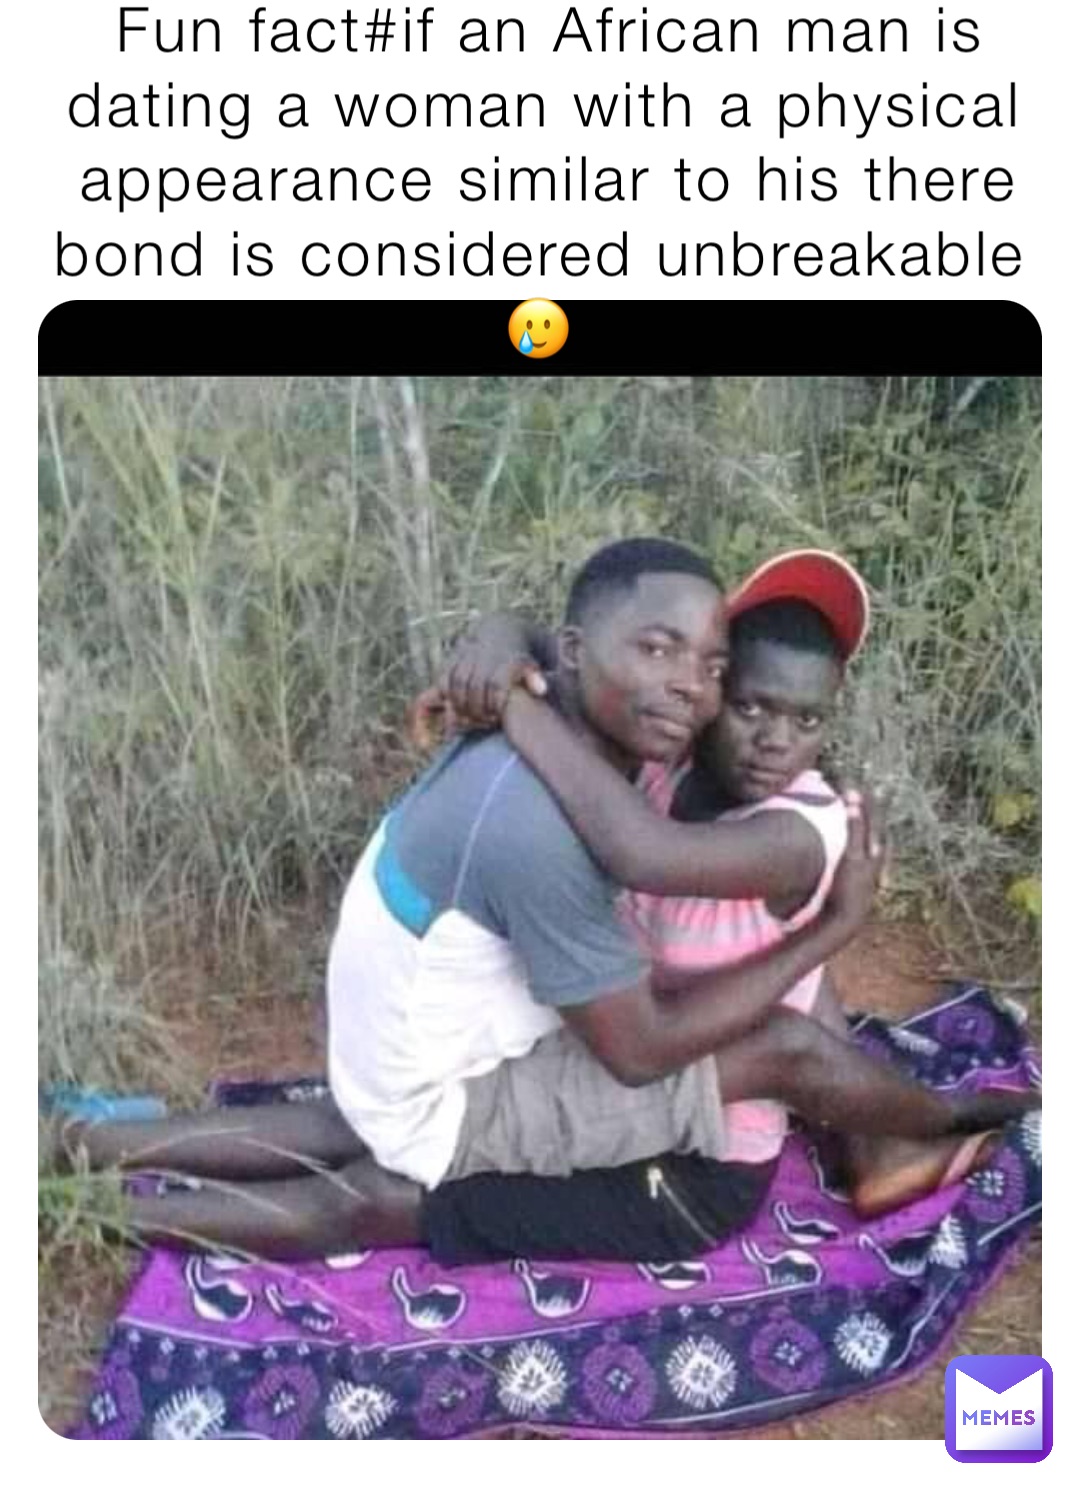 Fun fact#if an African man is dating a woman with a physical appearance similar to his there bond is considered unbreakable 🥲